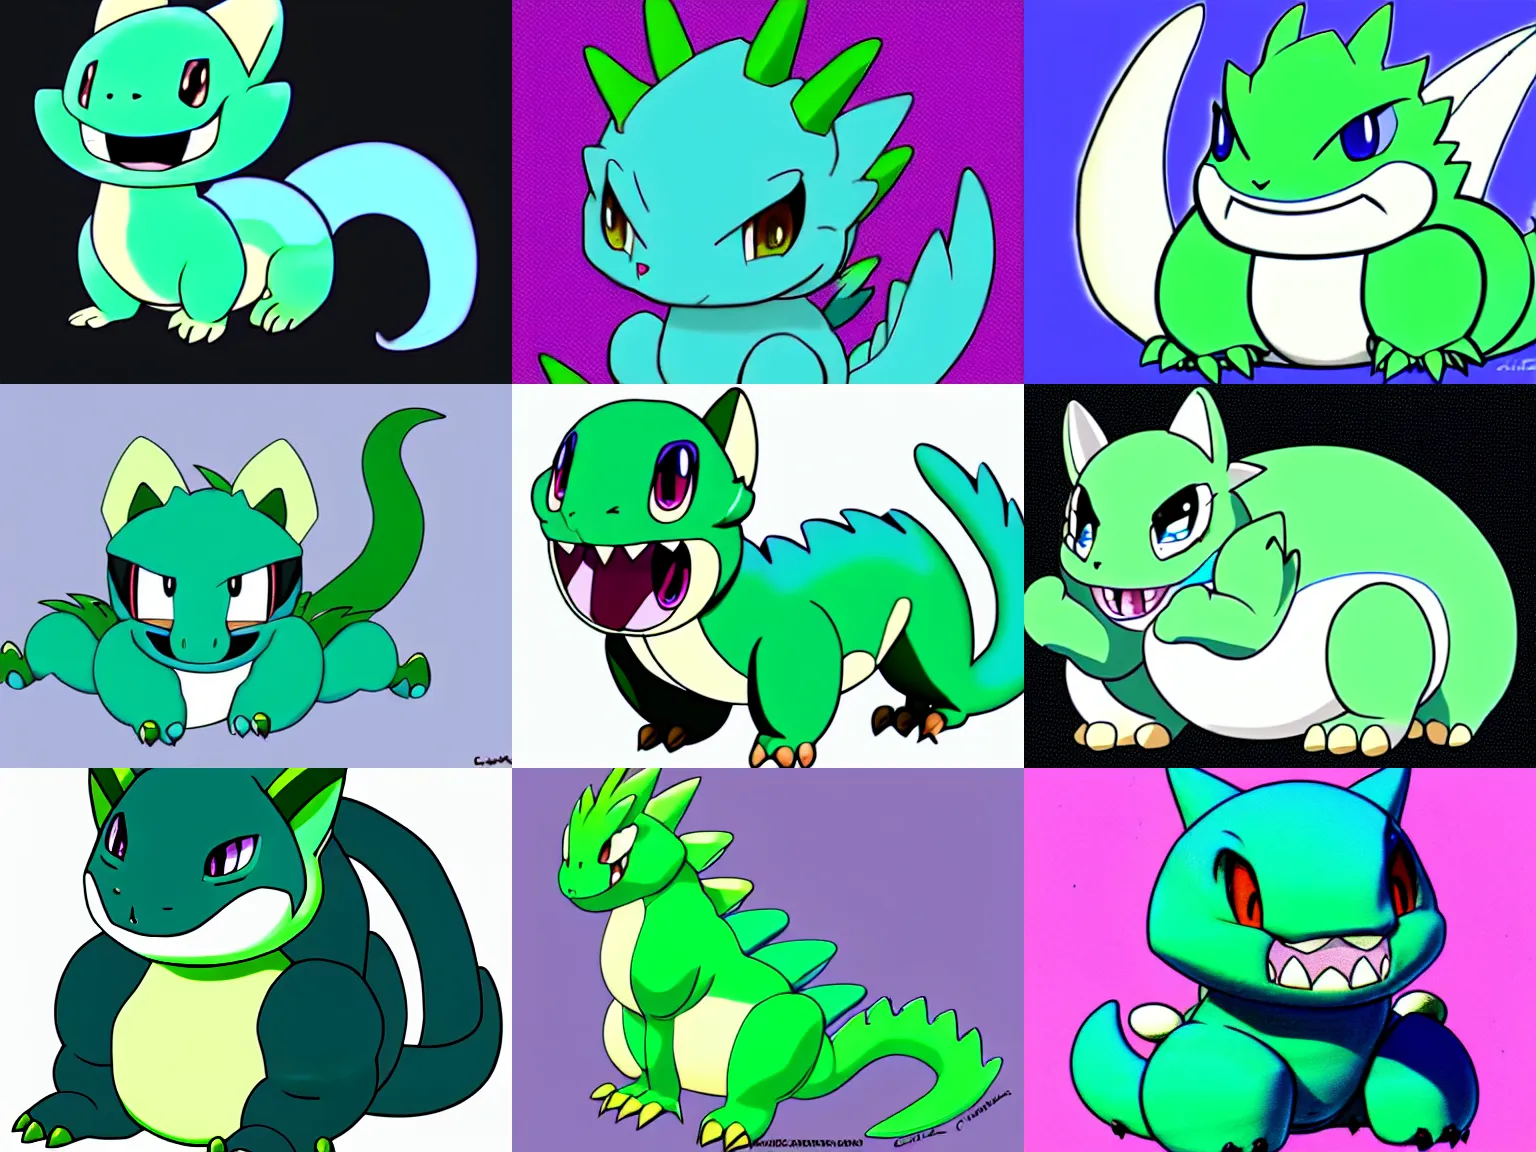 Prompt: a cartoon of a chubby blue and green chubby chubby cute chibi chubby dragon, concept art by Ken Sugimori, featured on deviantart, furry art, chubby, furaffinity, deviantart hd, cel shading, chubby, commission for